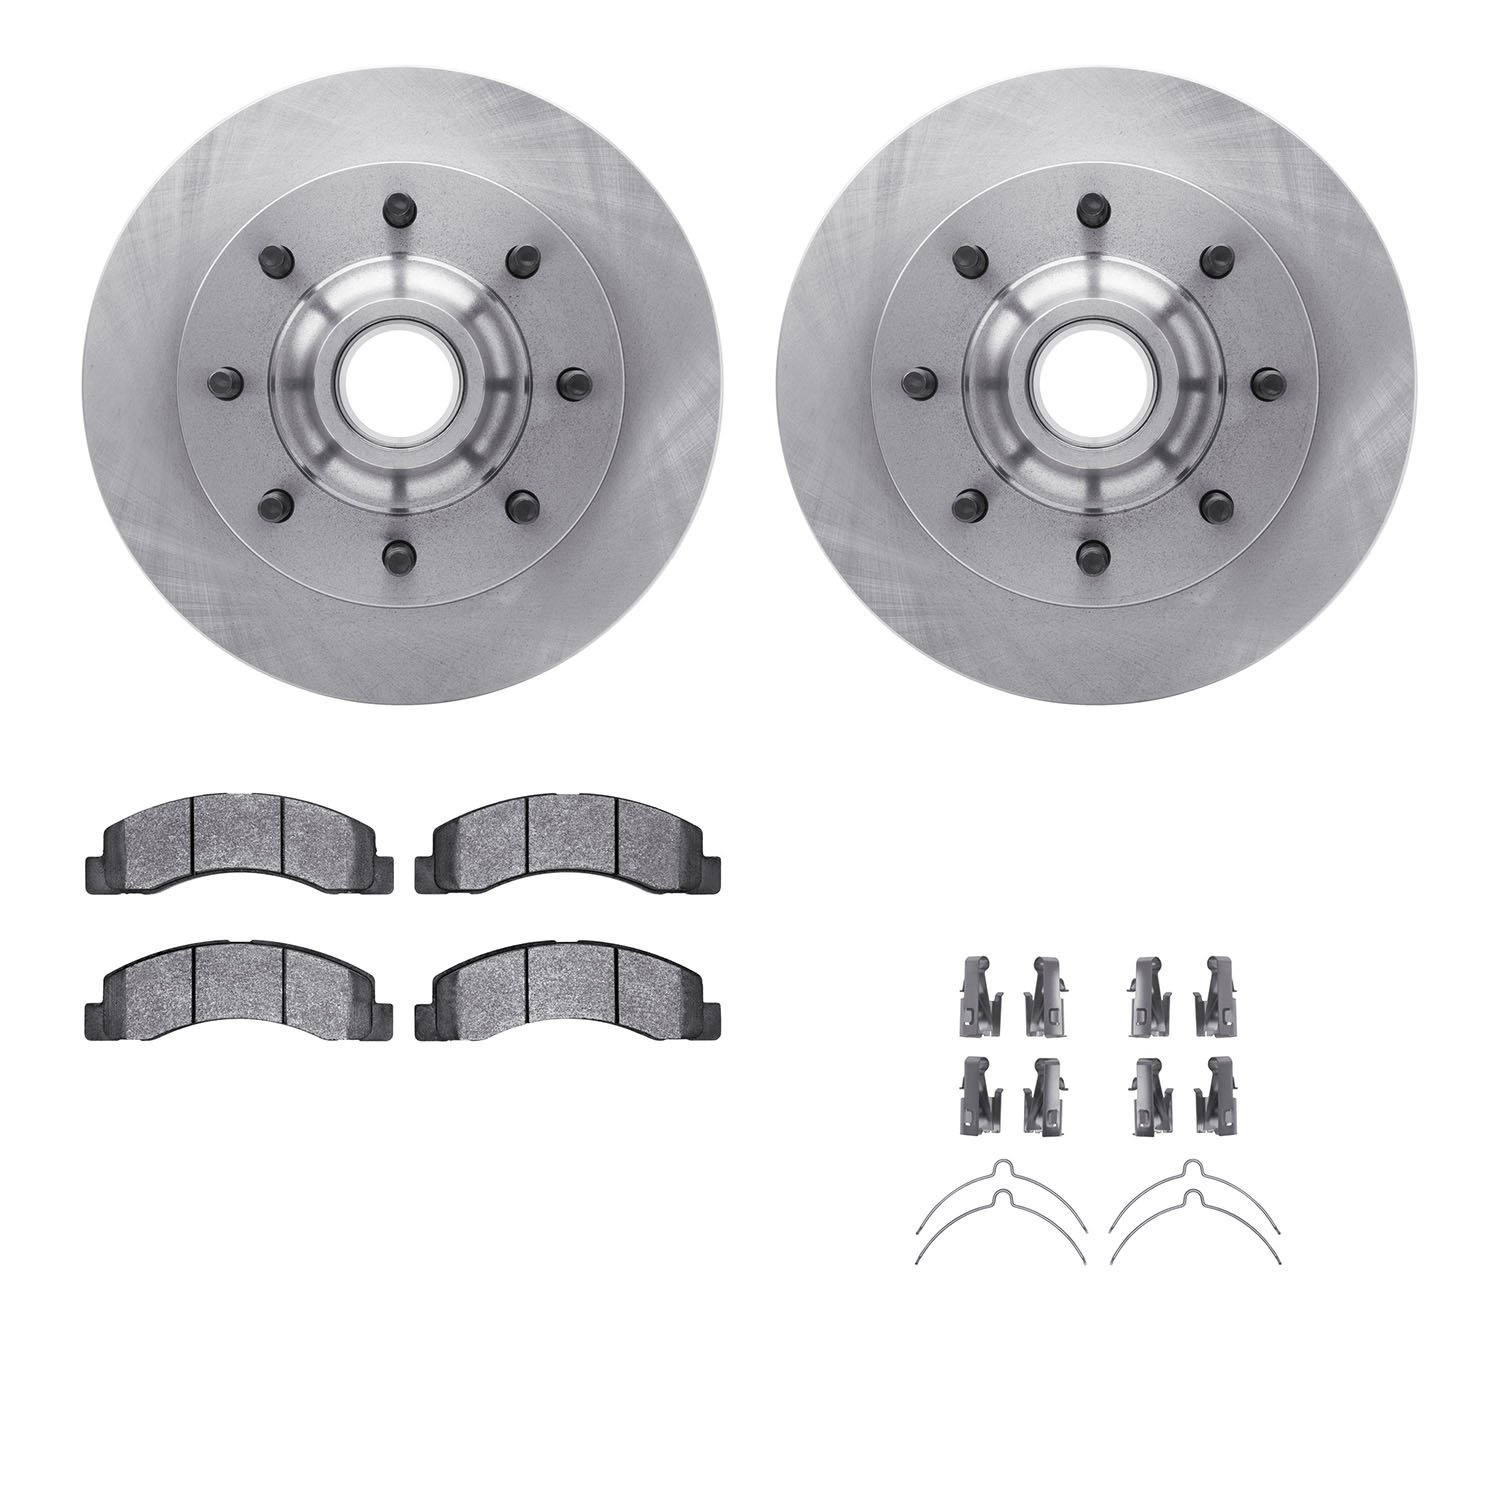 6412-54143 Brake Rotors with Ultimate-Duty Brake Pads Kit & Hardware, 1999-2002 Ford/Lincoln/Mercury/Mazda, Position: Front